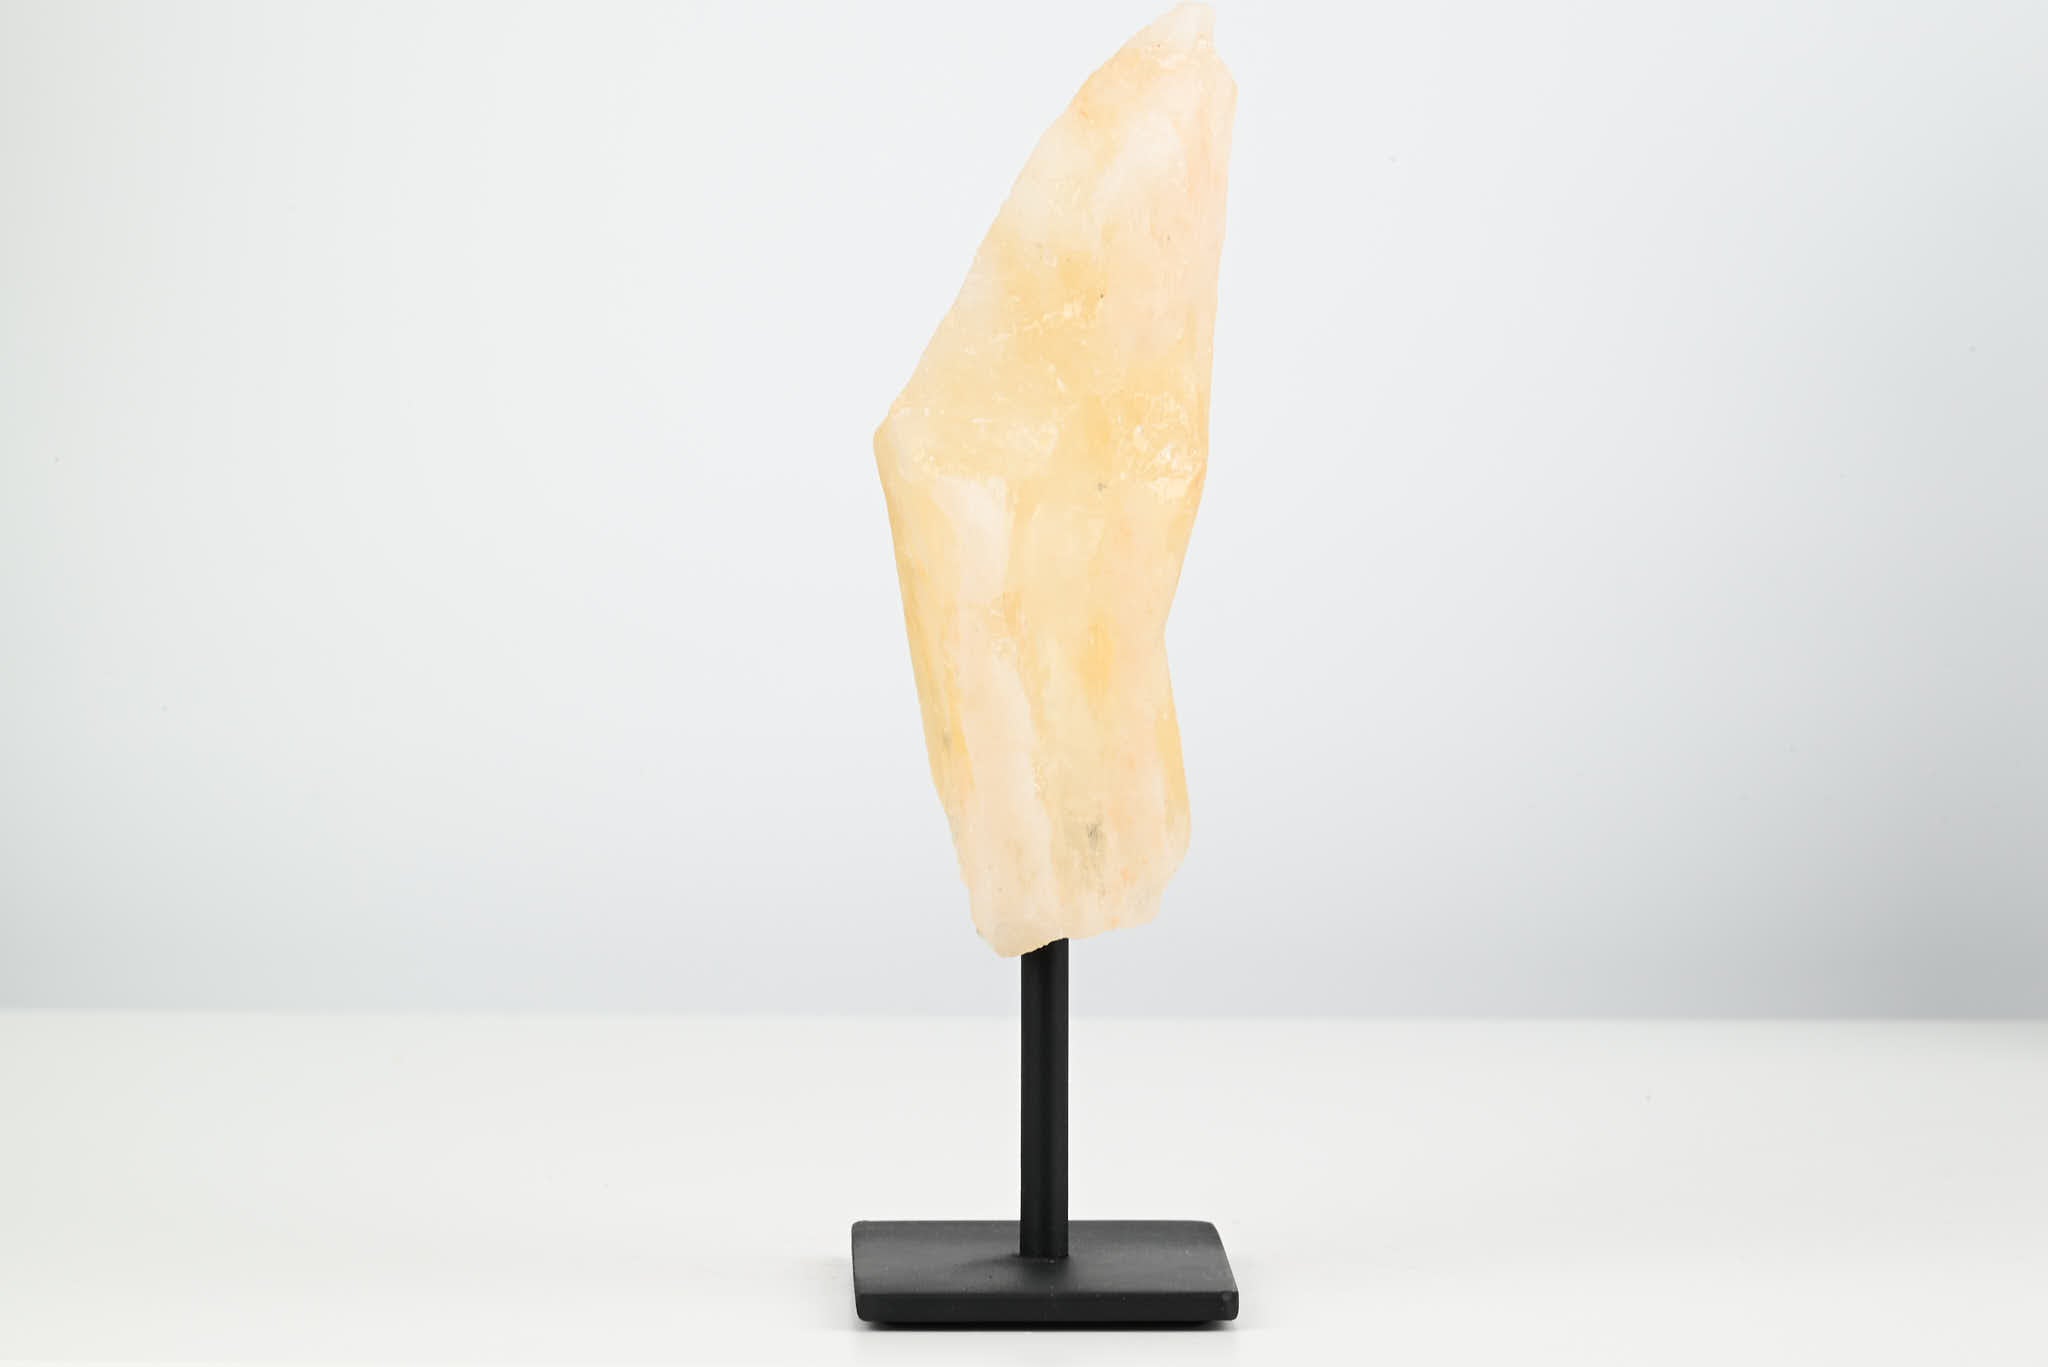 Citrine Cluster on Stand - Small 18cm Tall - #CLUSCI-63006